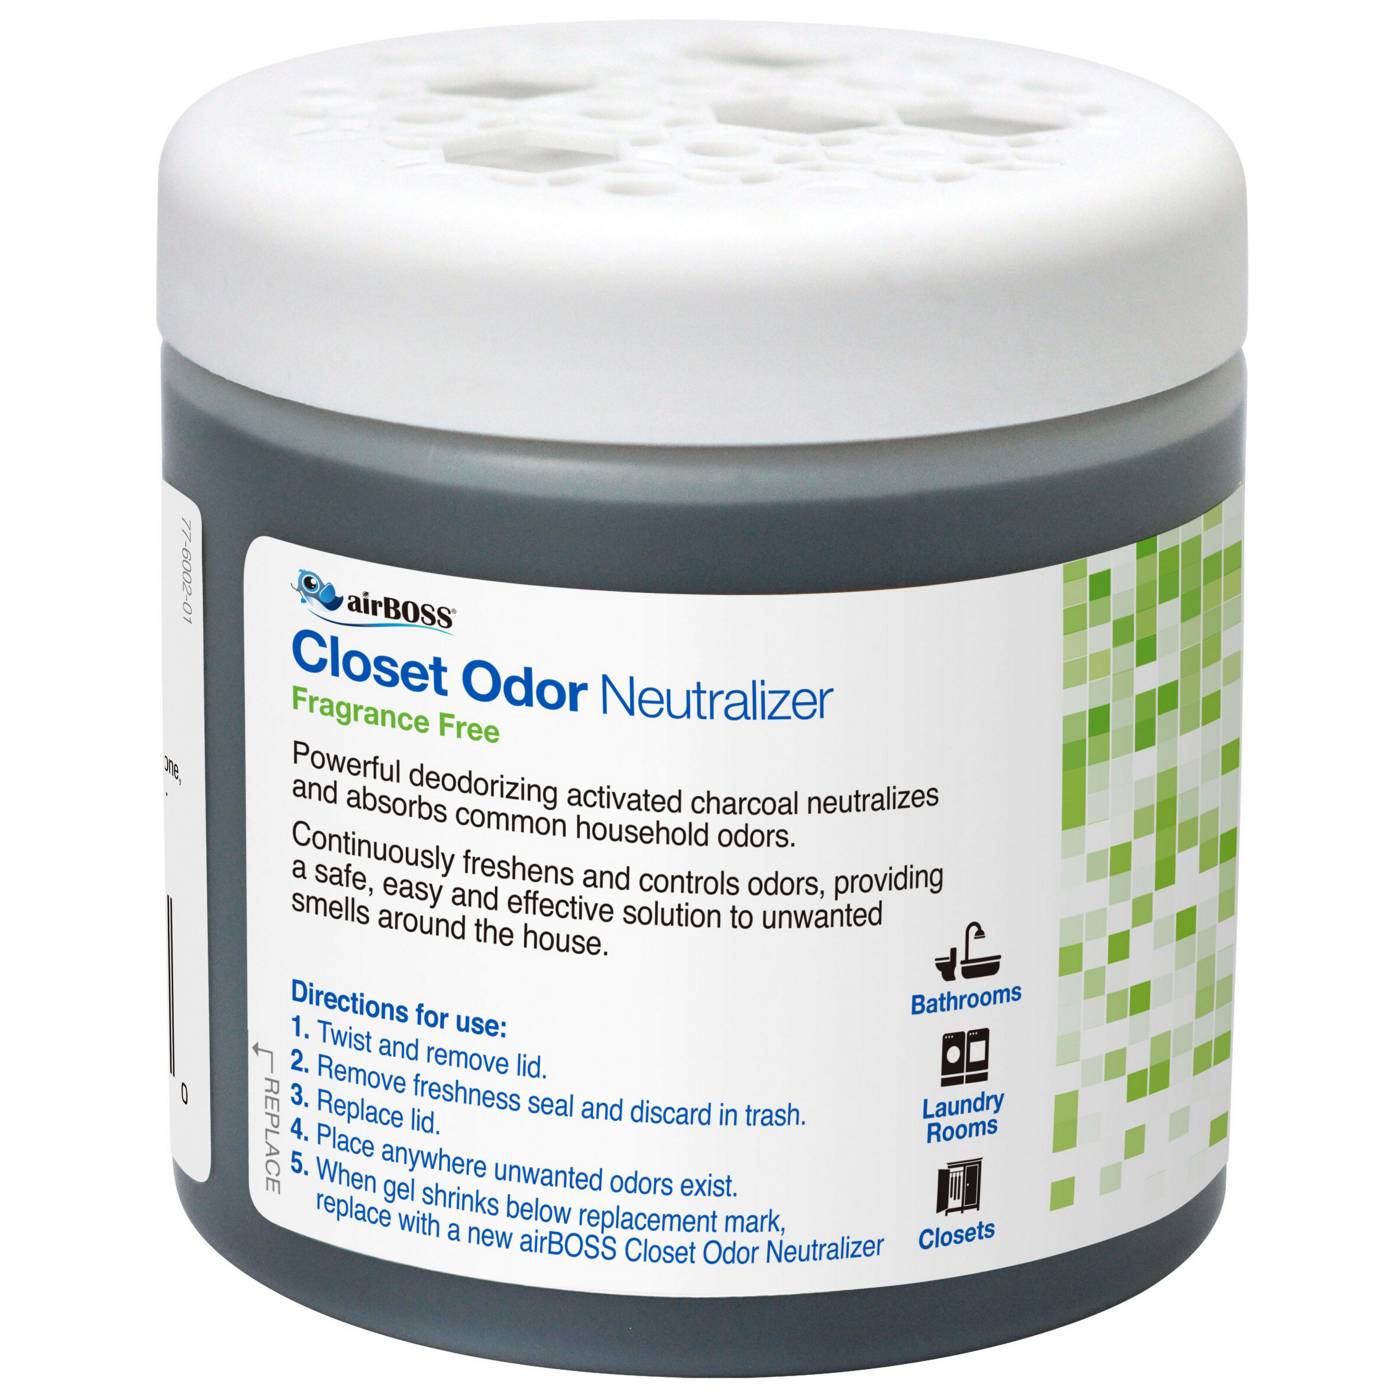 airBOSS Closet Odor Neutralizer - Fragrance Free; image 2 of 2